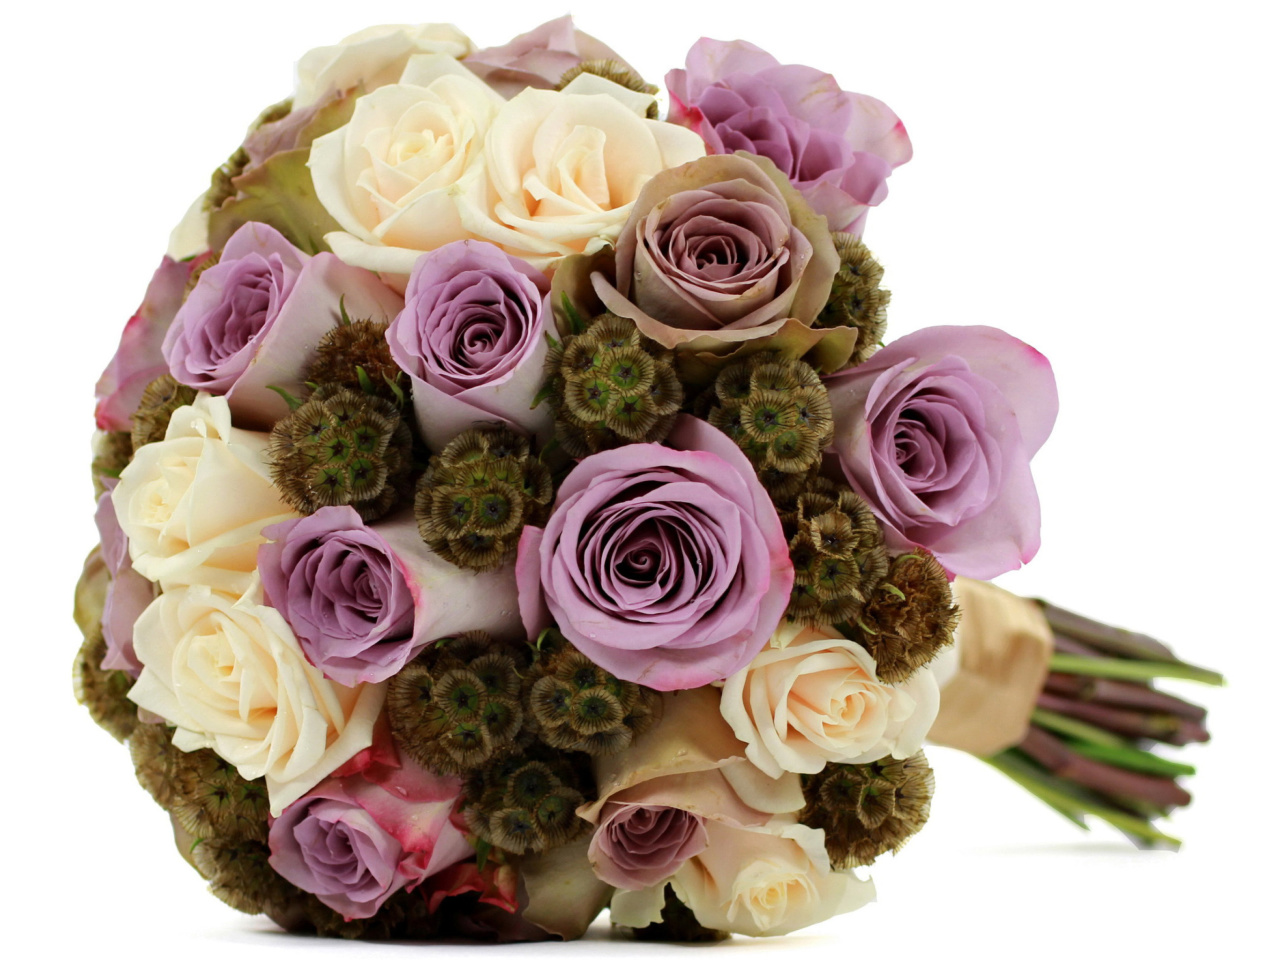 Bouquet with lilac roses screenshot #1 1280x960